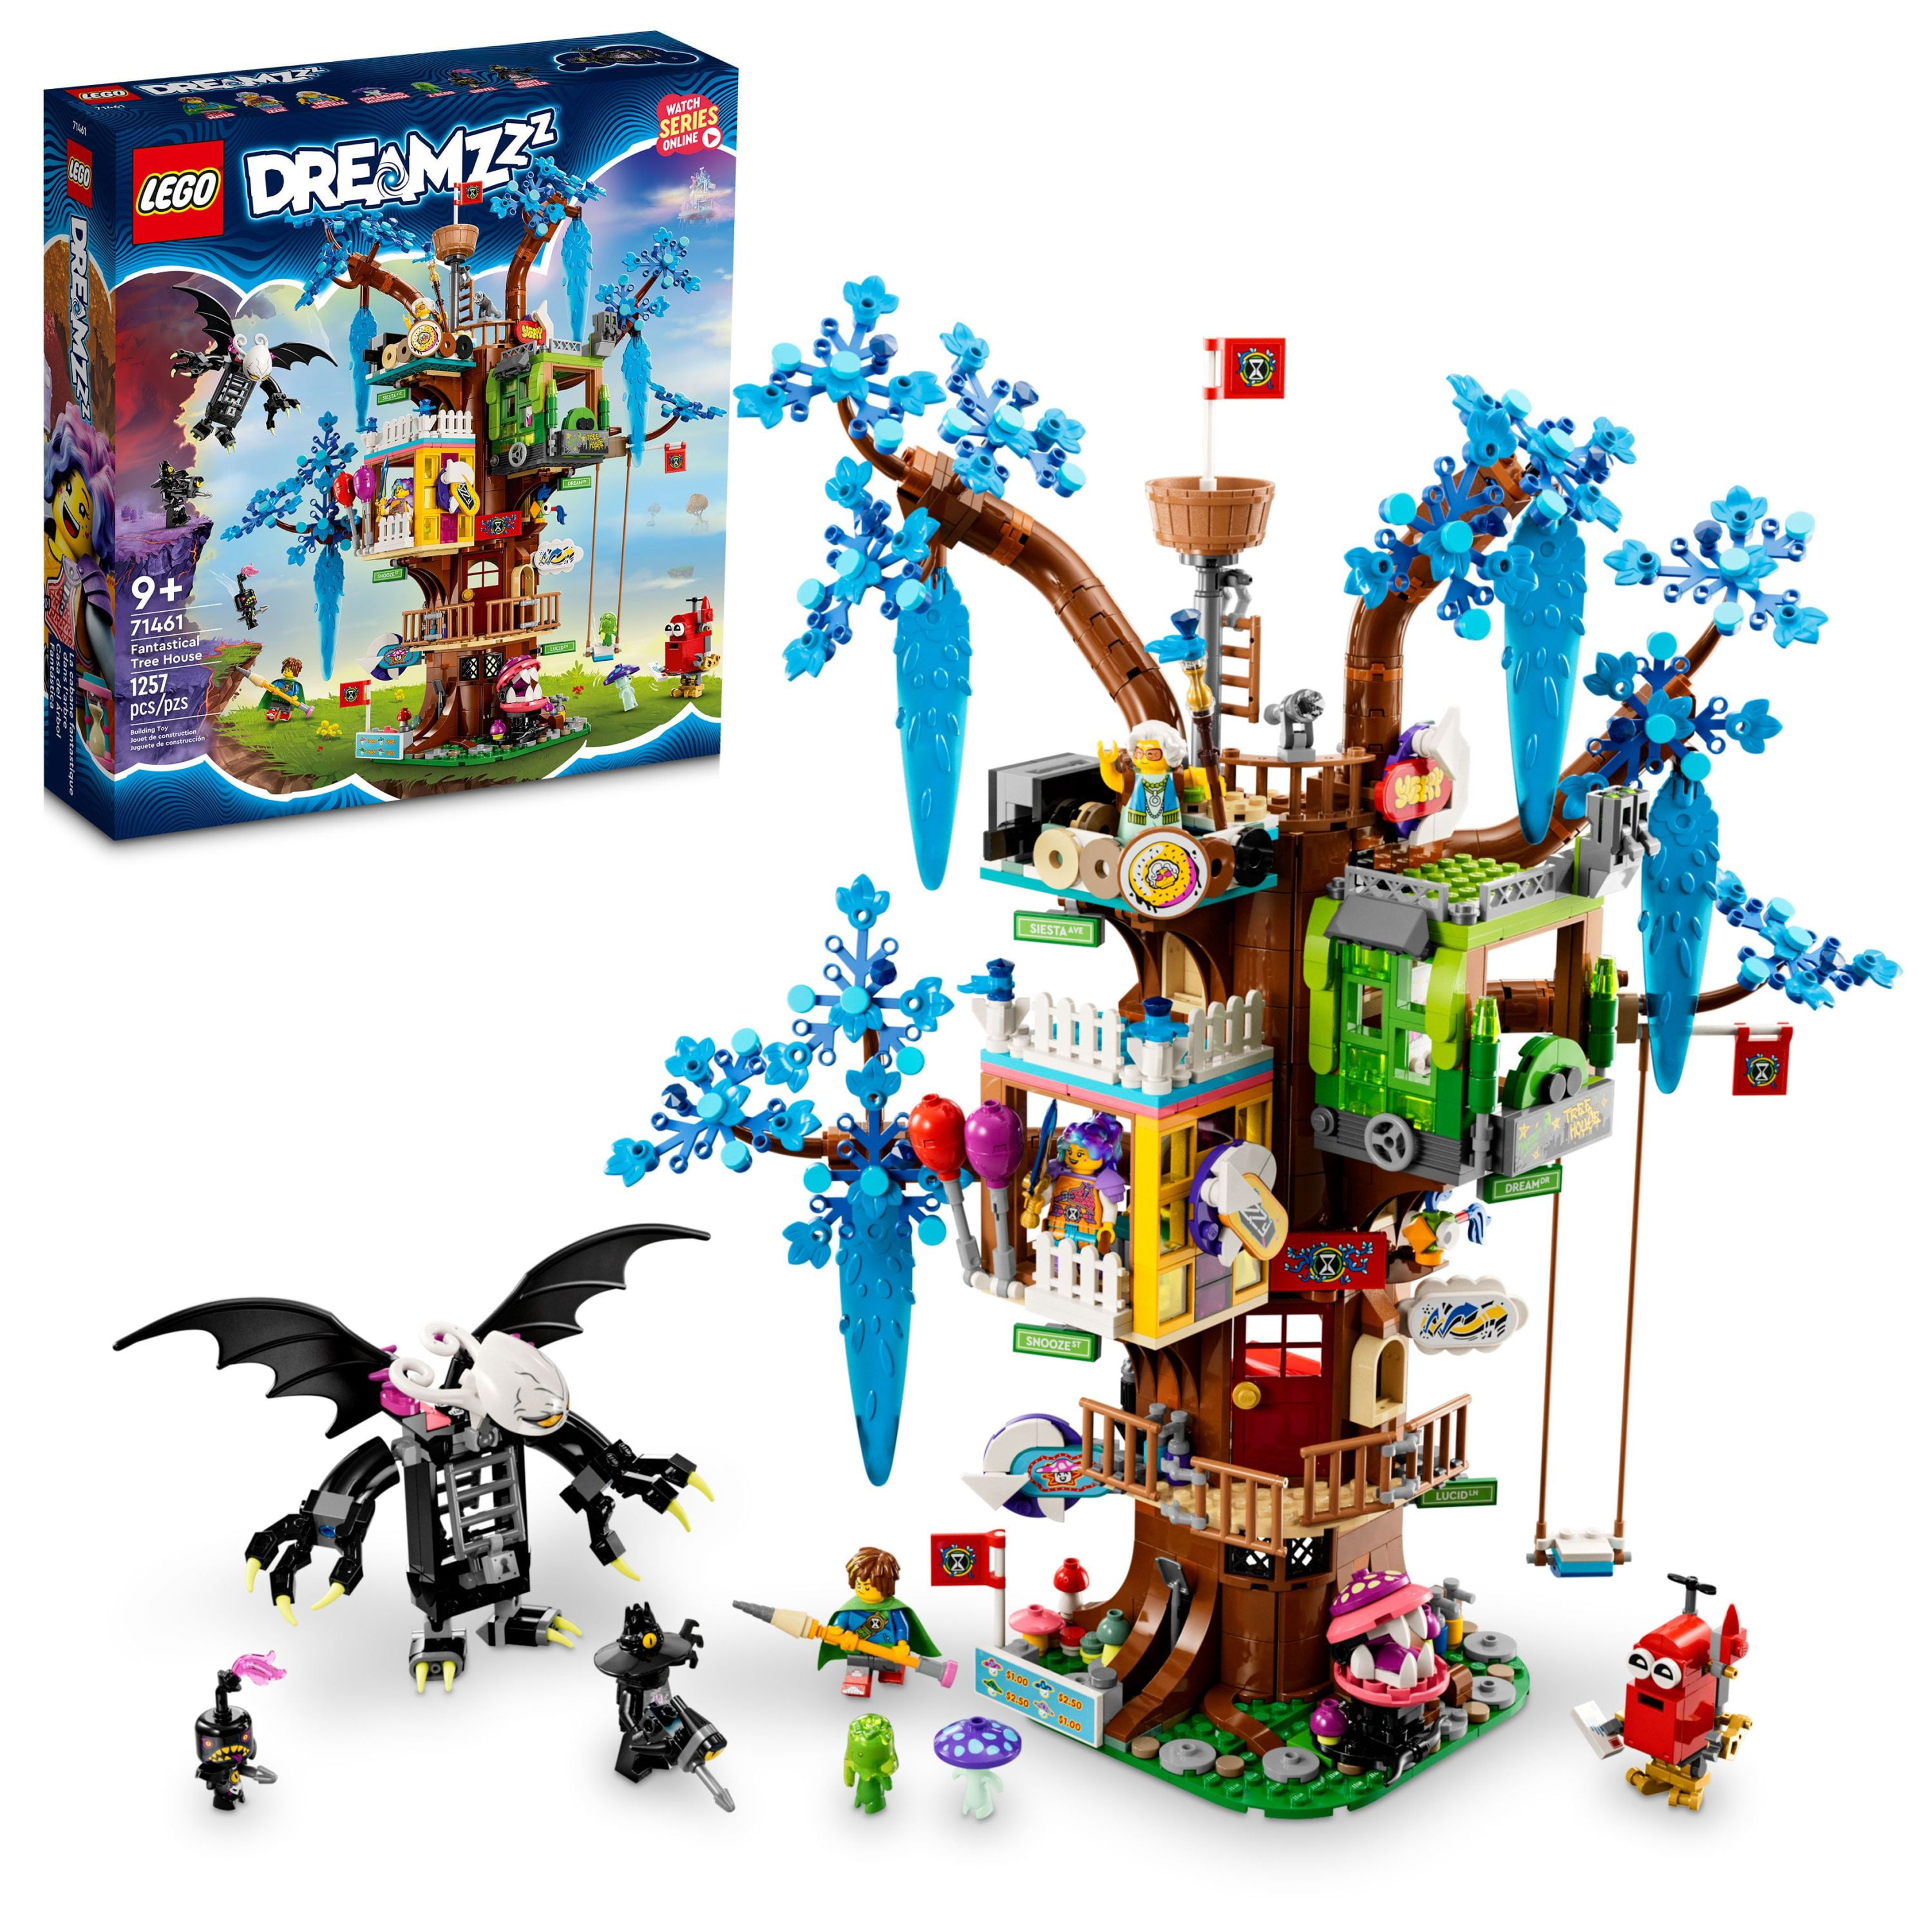 25+)Wise Mystical Tree, if you're 25 and have a Lego, you …